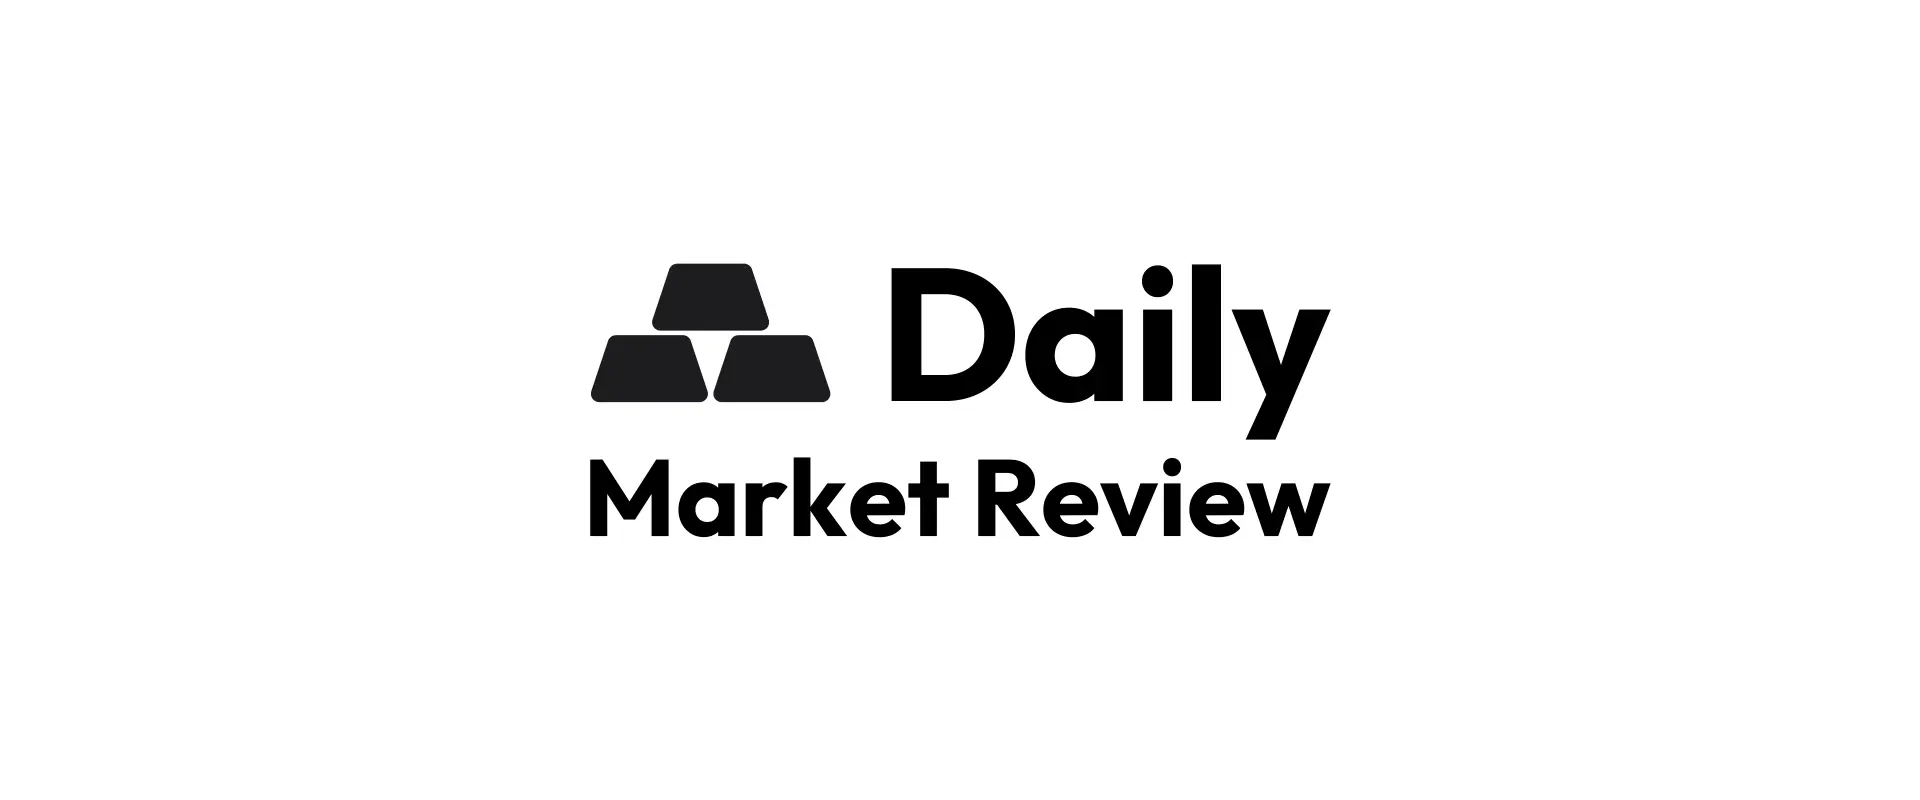 Daily market review